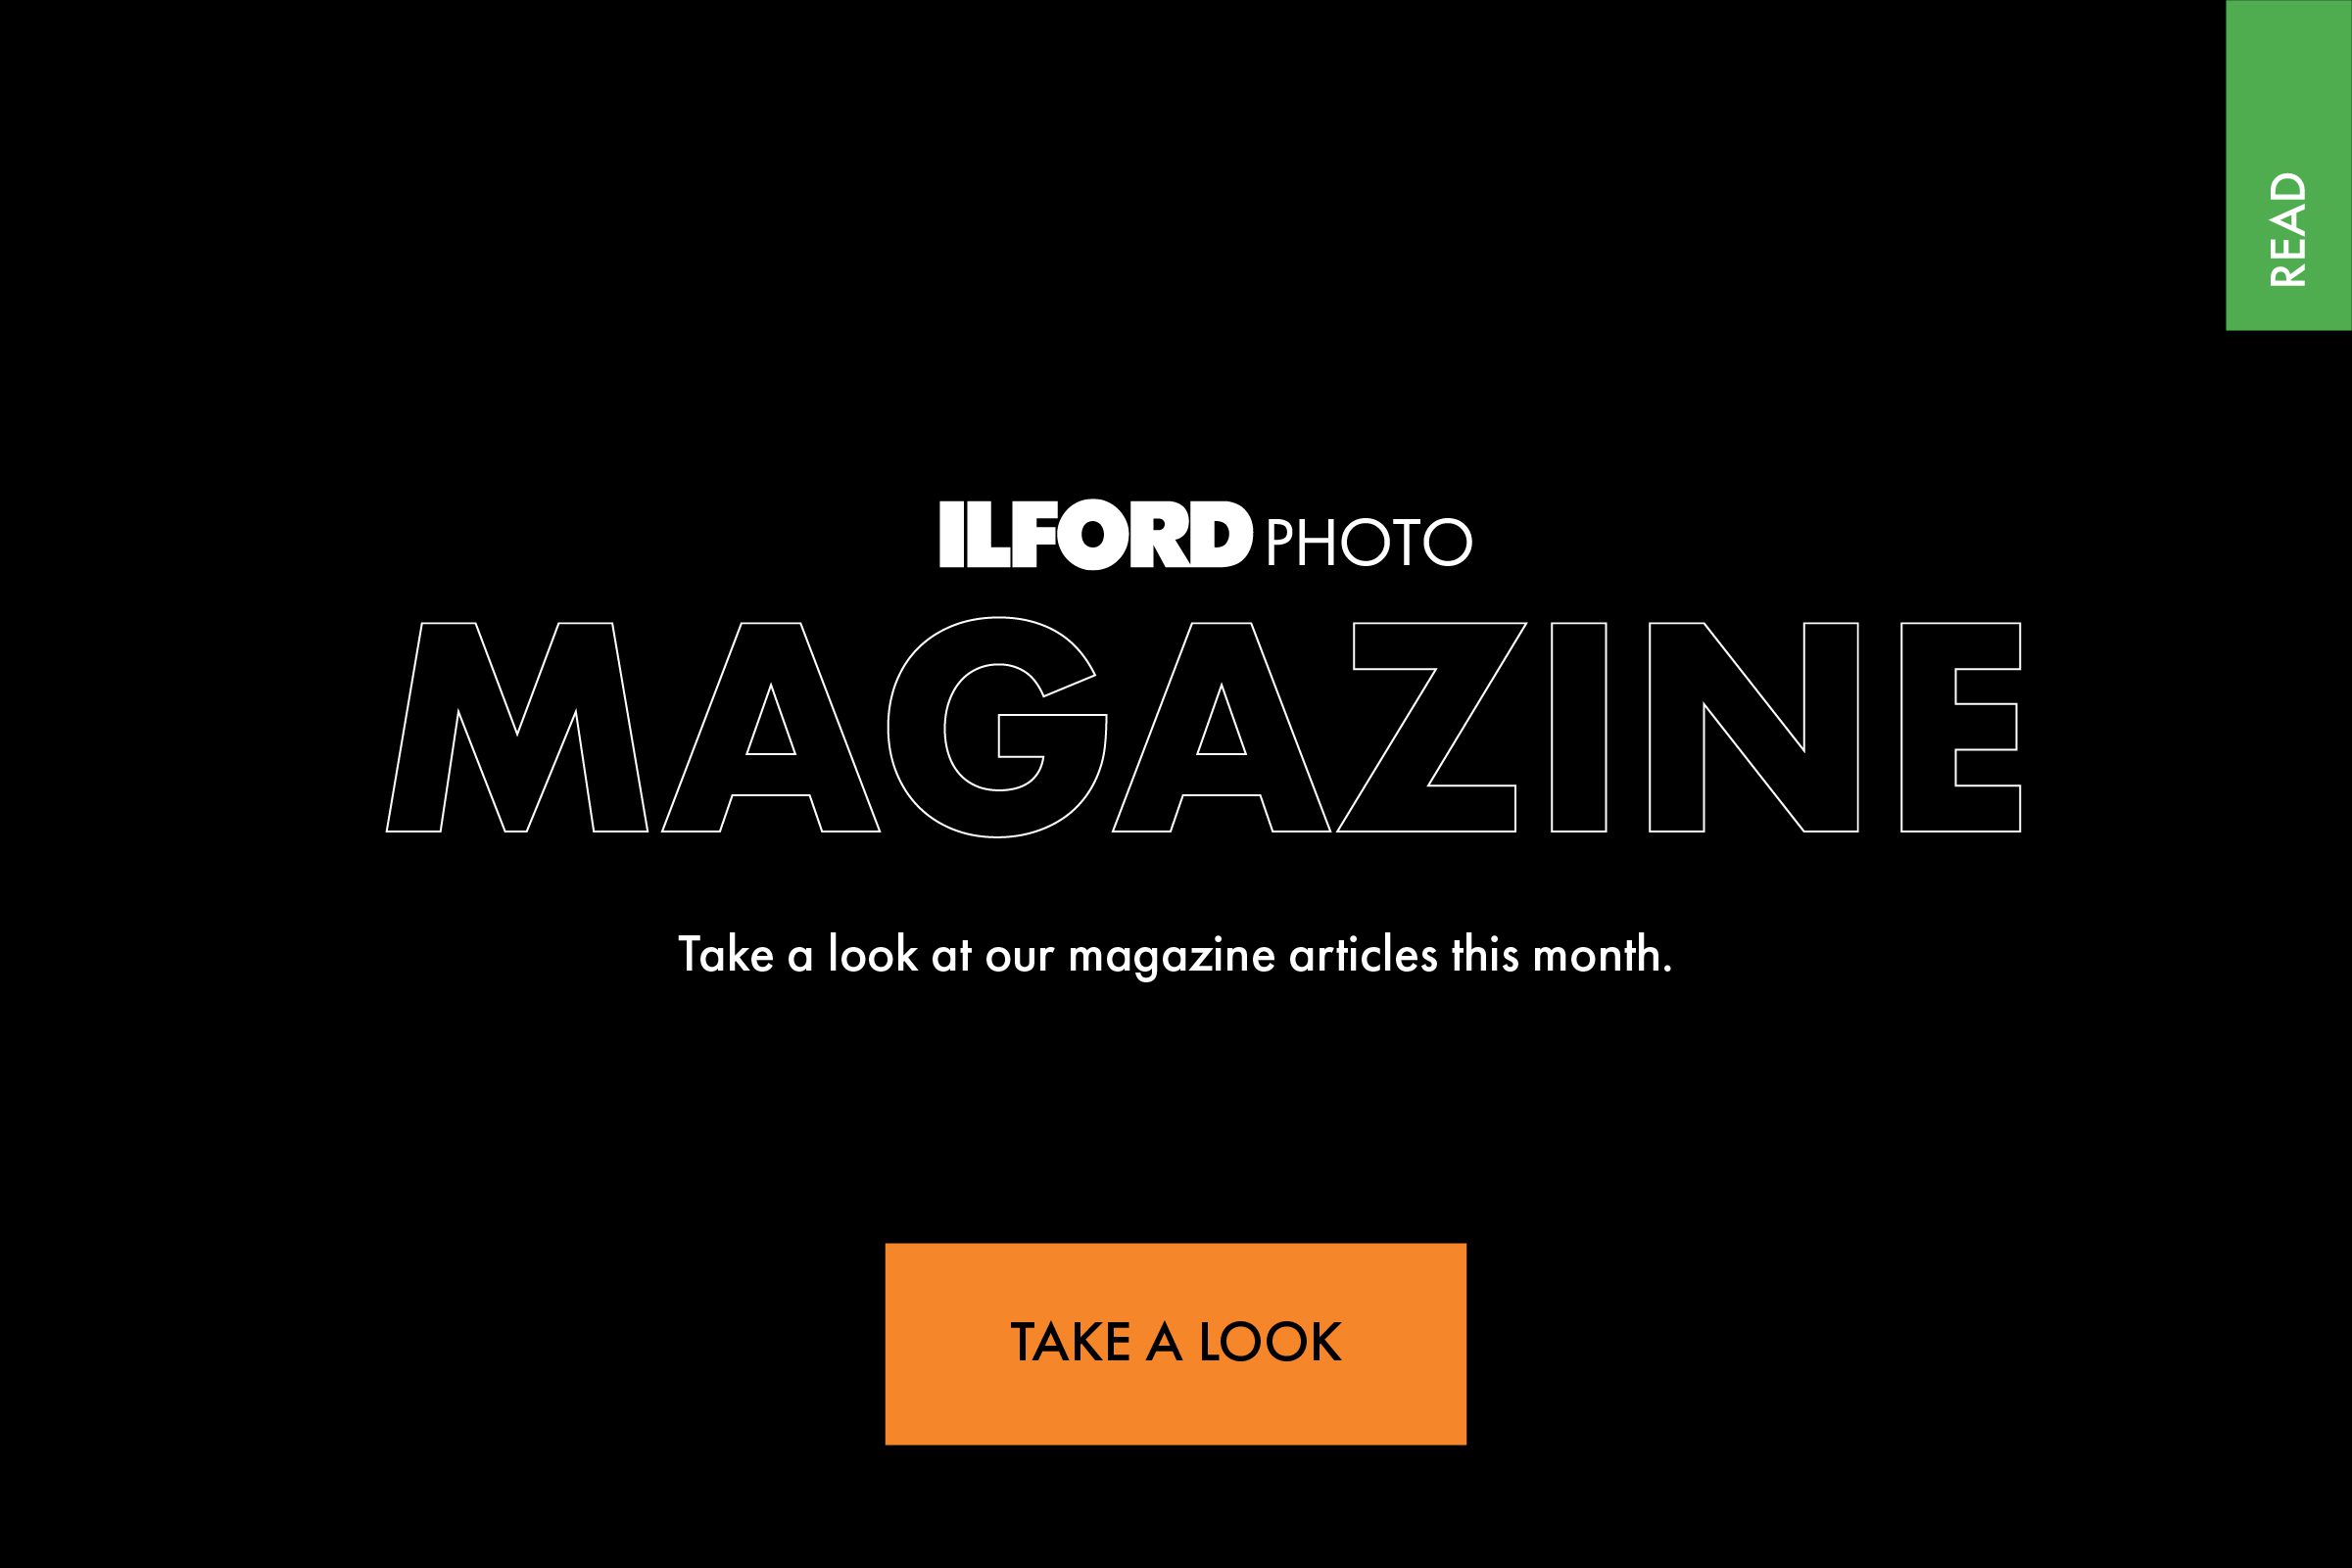 A black background with a white logo saying ILFORD Photo above text that says Magazine. Below this is an orange button that says 'take a look;